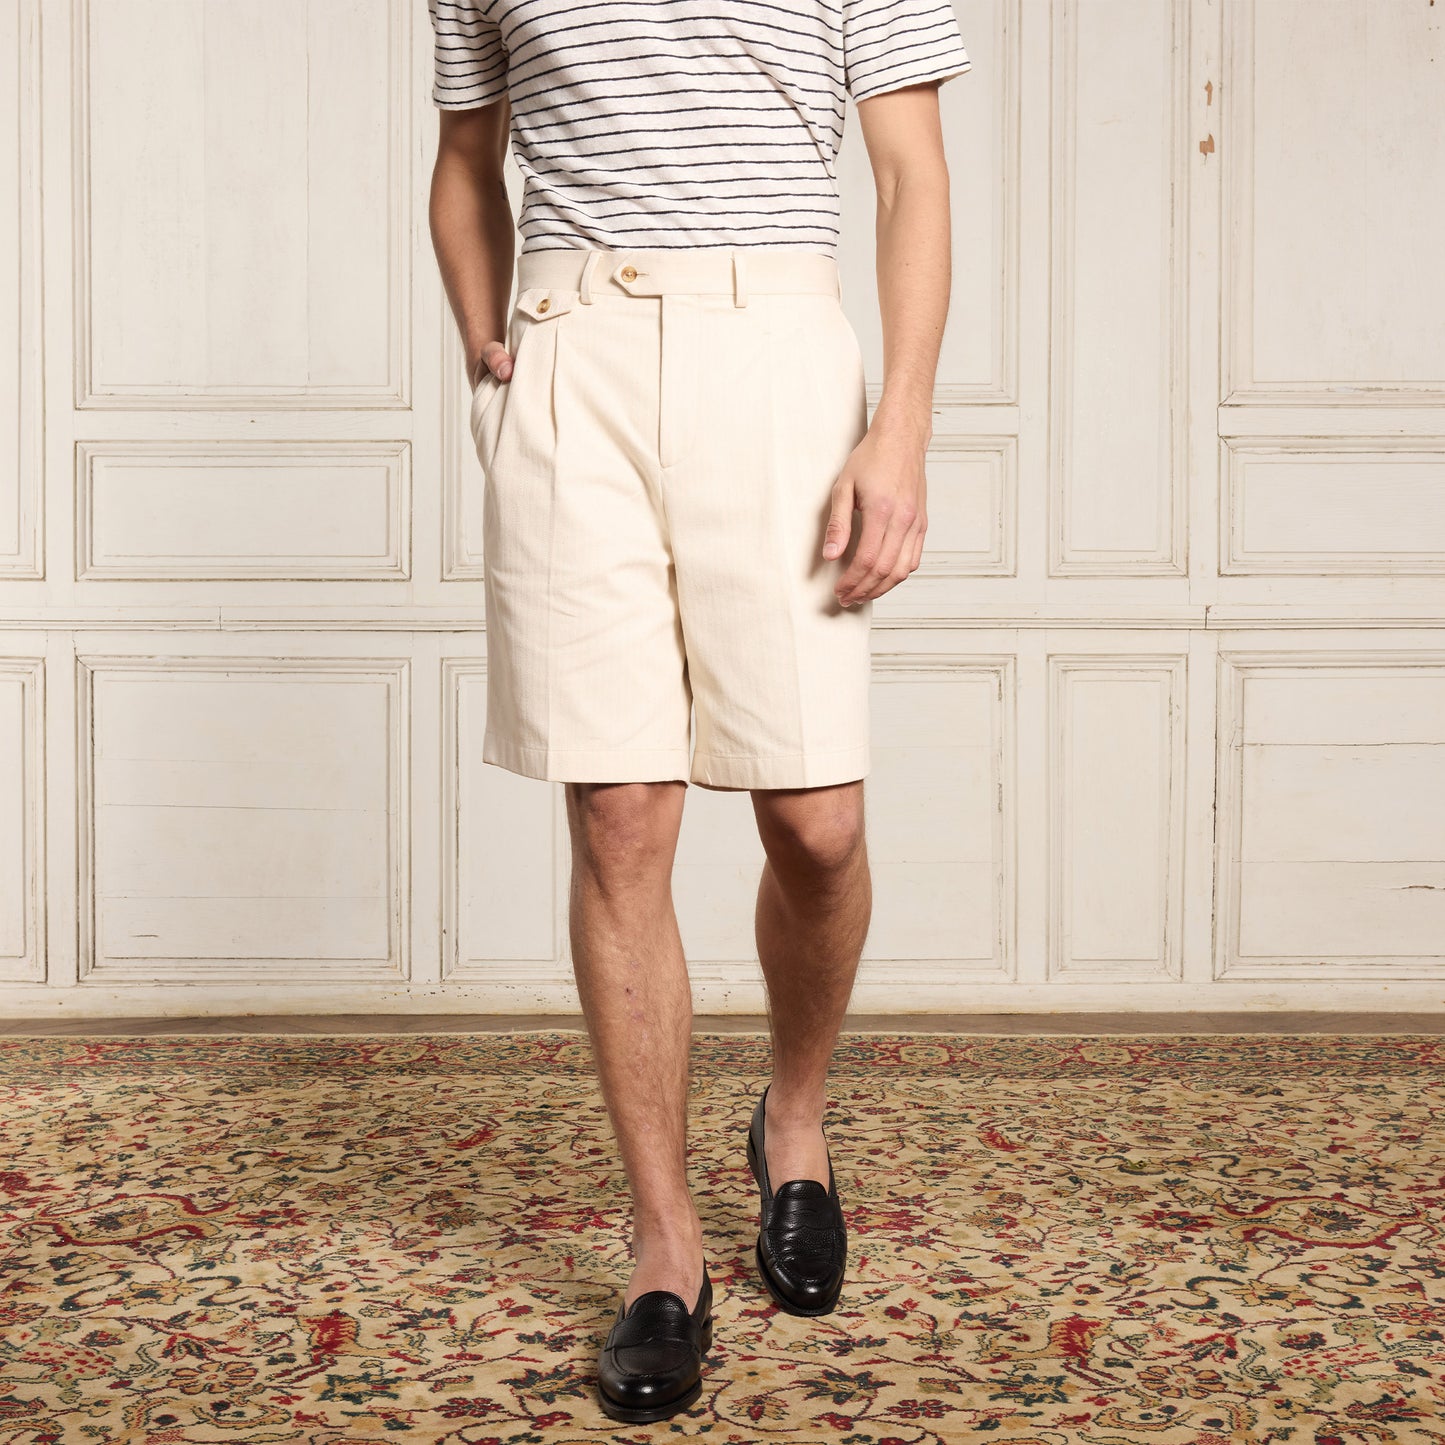 Double-pleated shorts in ecru cotton